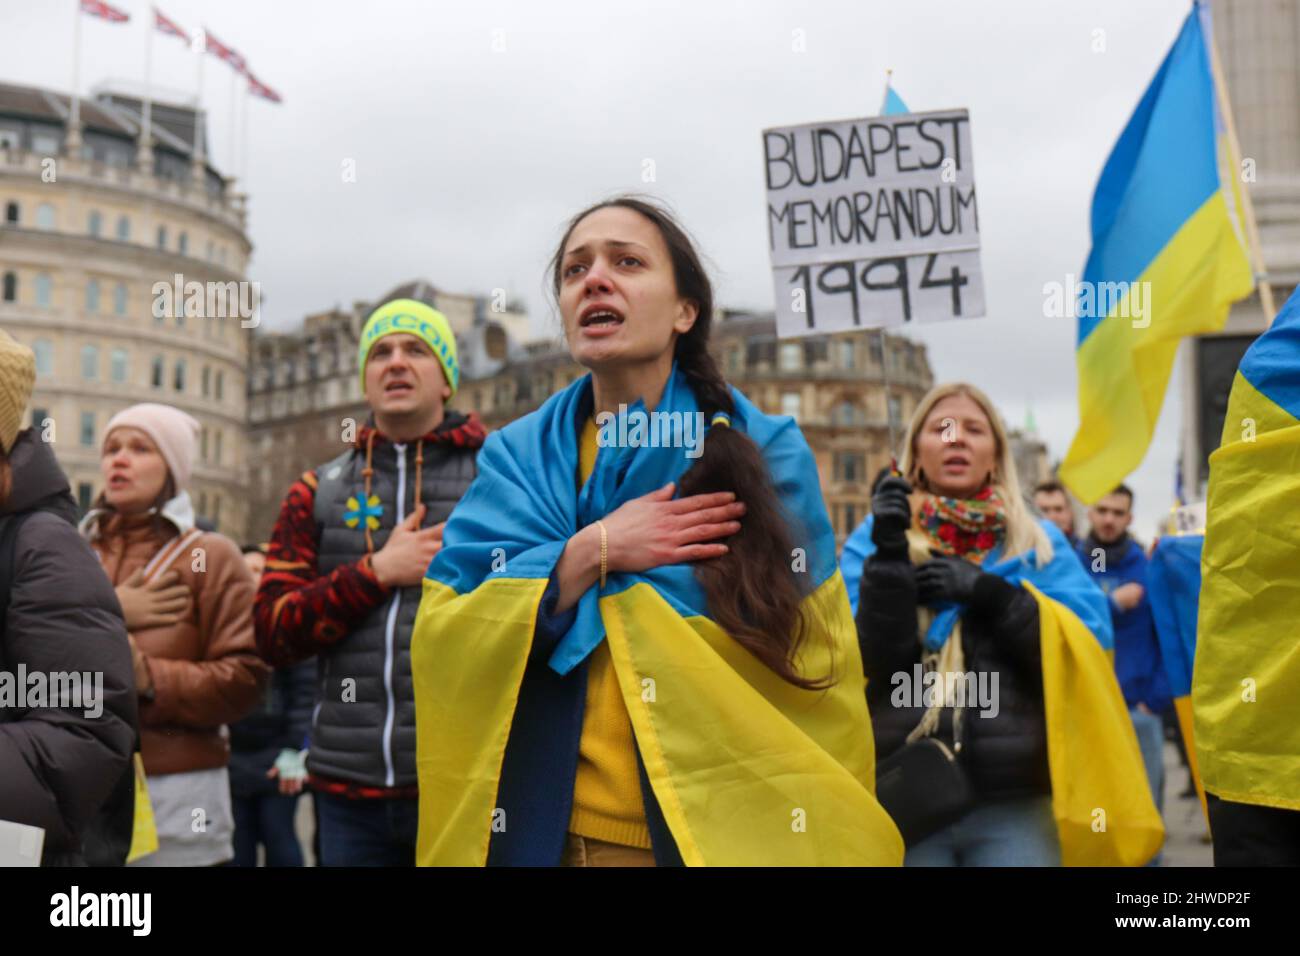 LONDON, MARCH 05 2022, Protesters sing the Ukrainian national anthem during a protest against Russia's invasion of Ukraine on Trafalgar Square. Credit: Lucy North/Alamy Live News Stock Photo